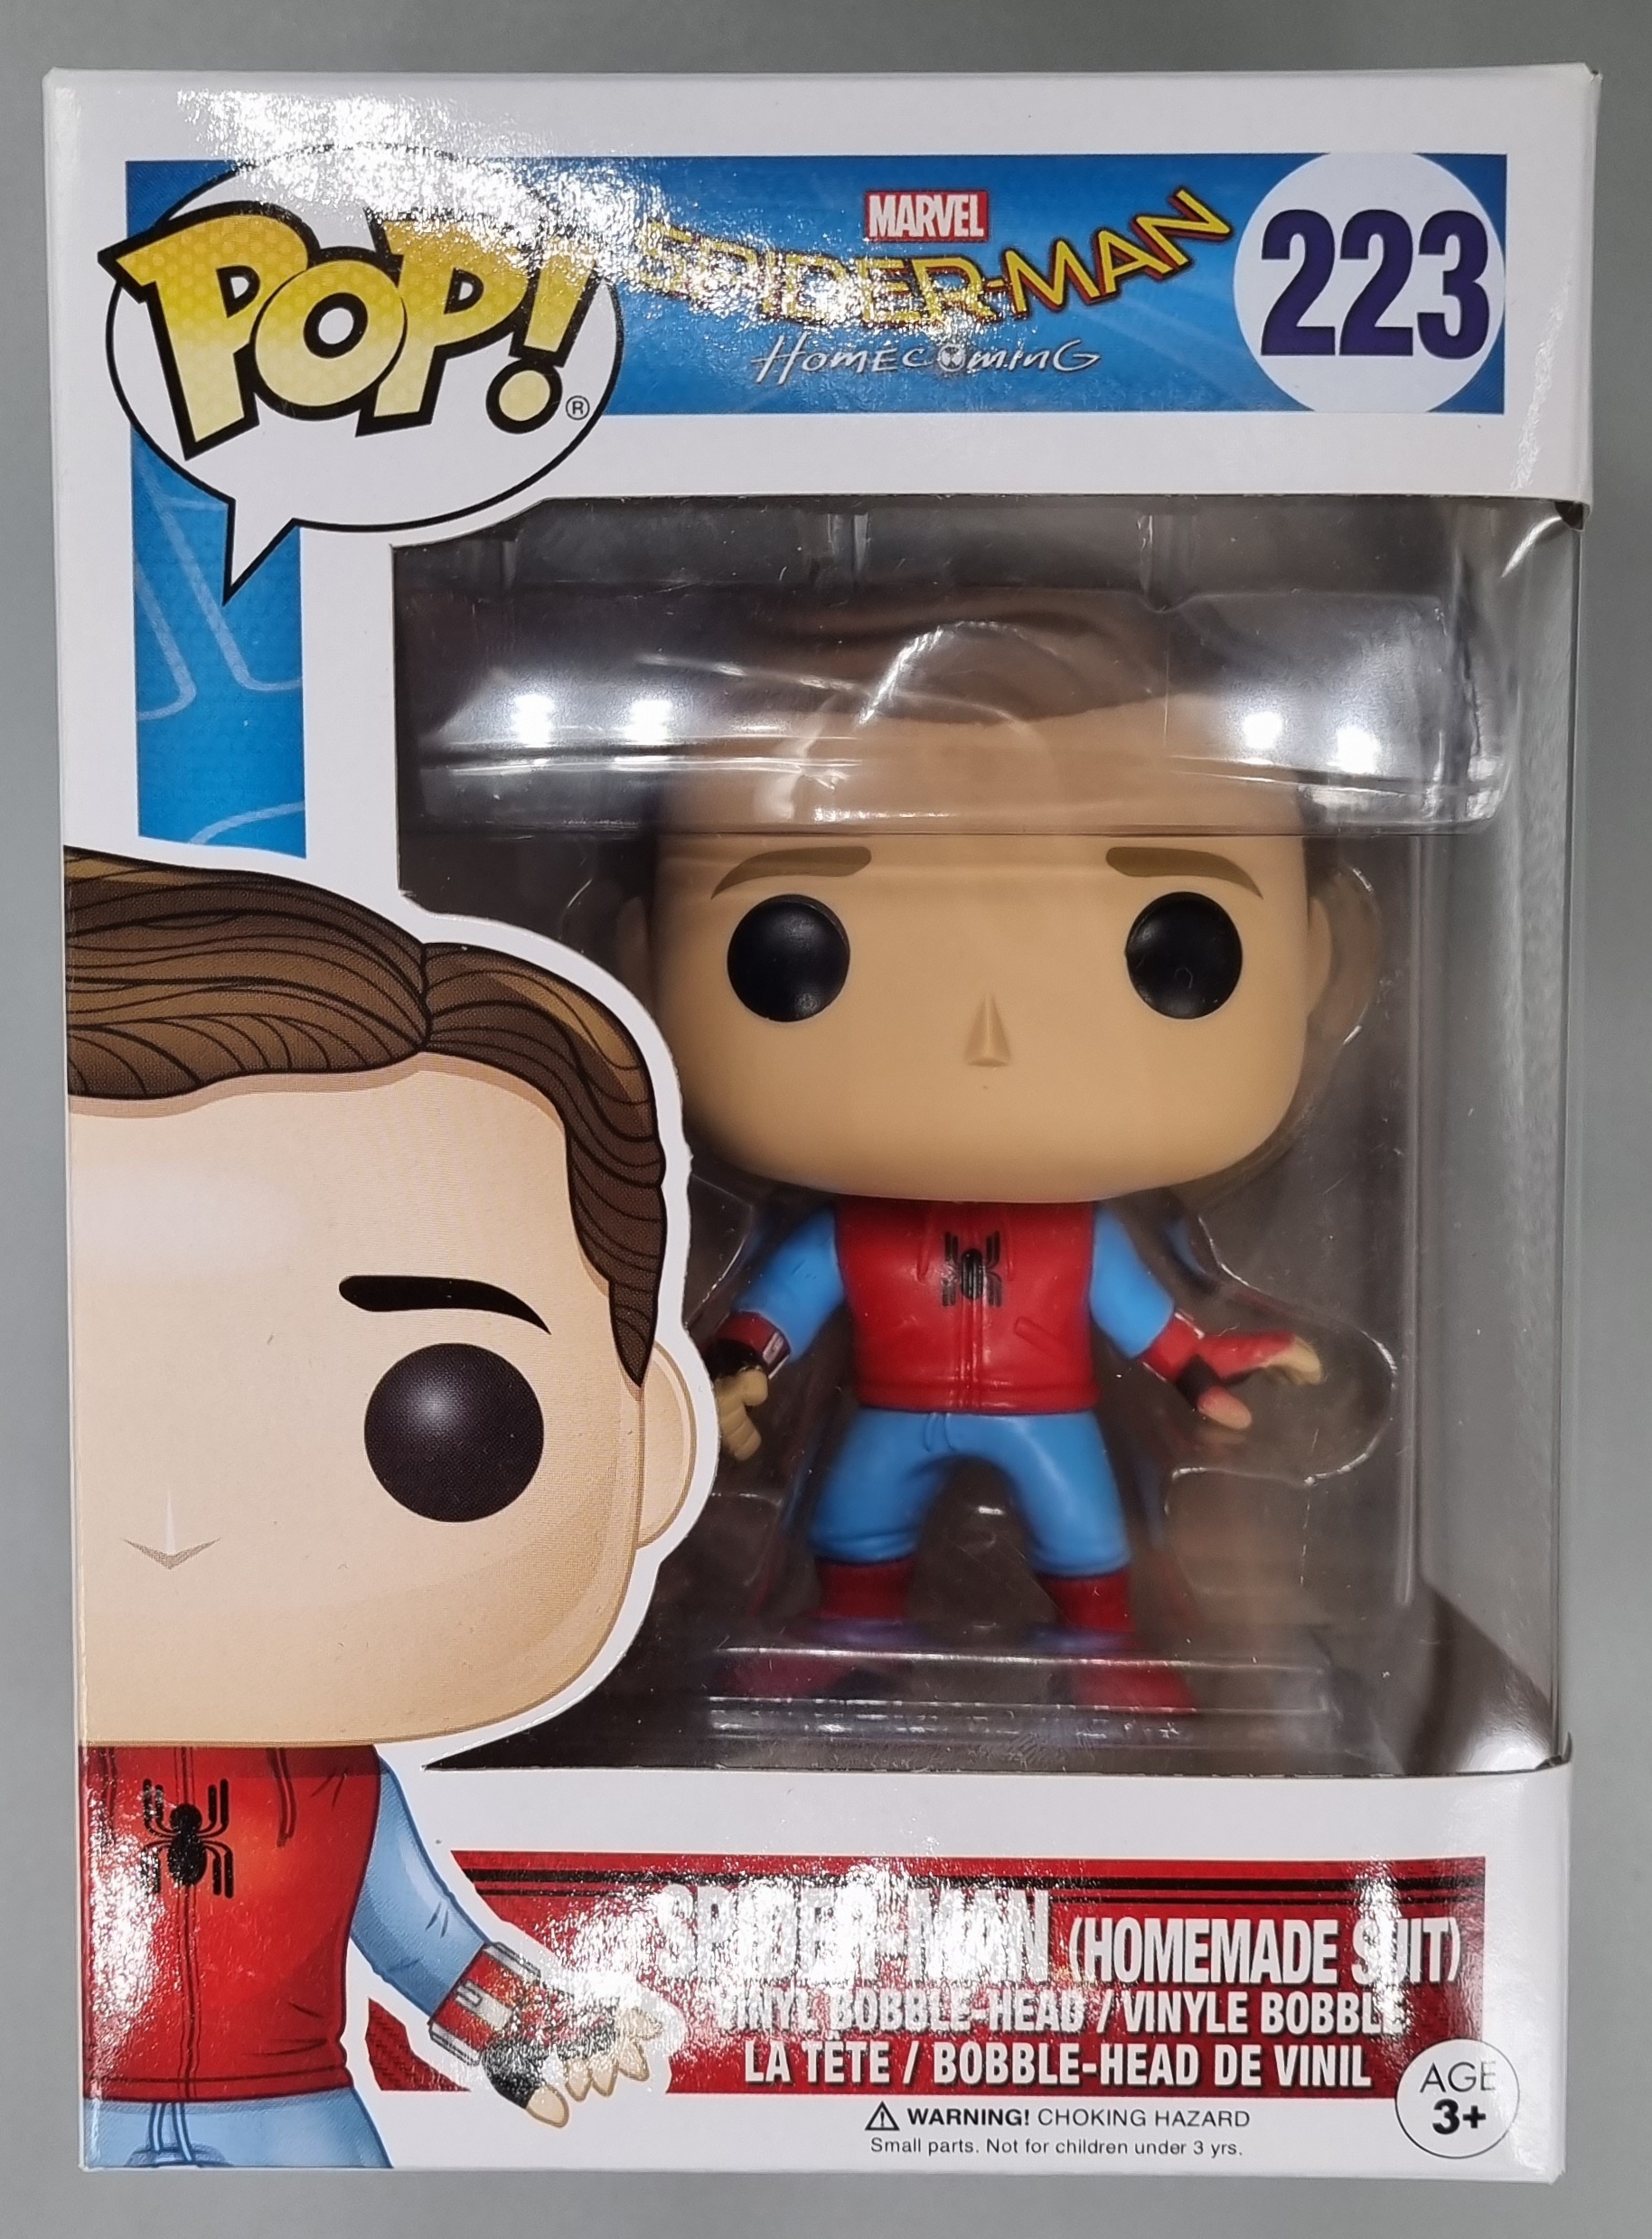 223 Spider-Man (Homemade Suit, Unmasked) Marvel Homecoming – Funko Pops